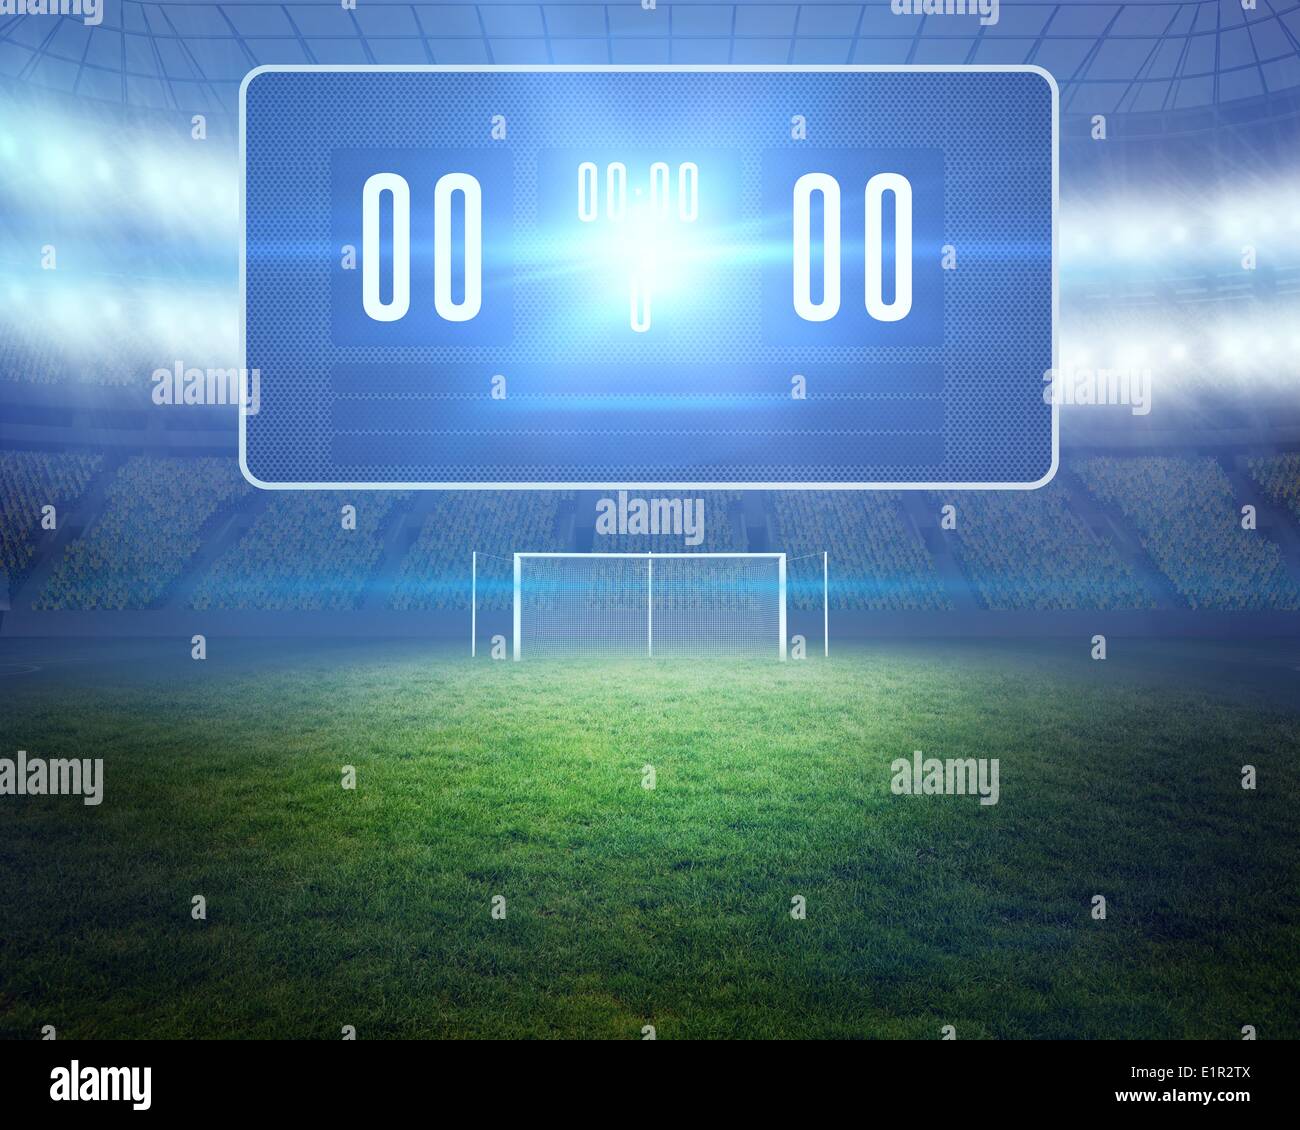 Football pitch with goalpost and scoreboard Stock Photo